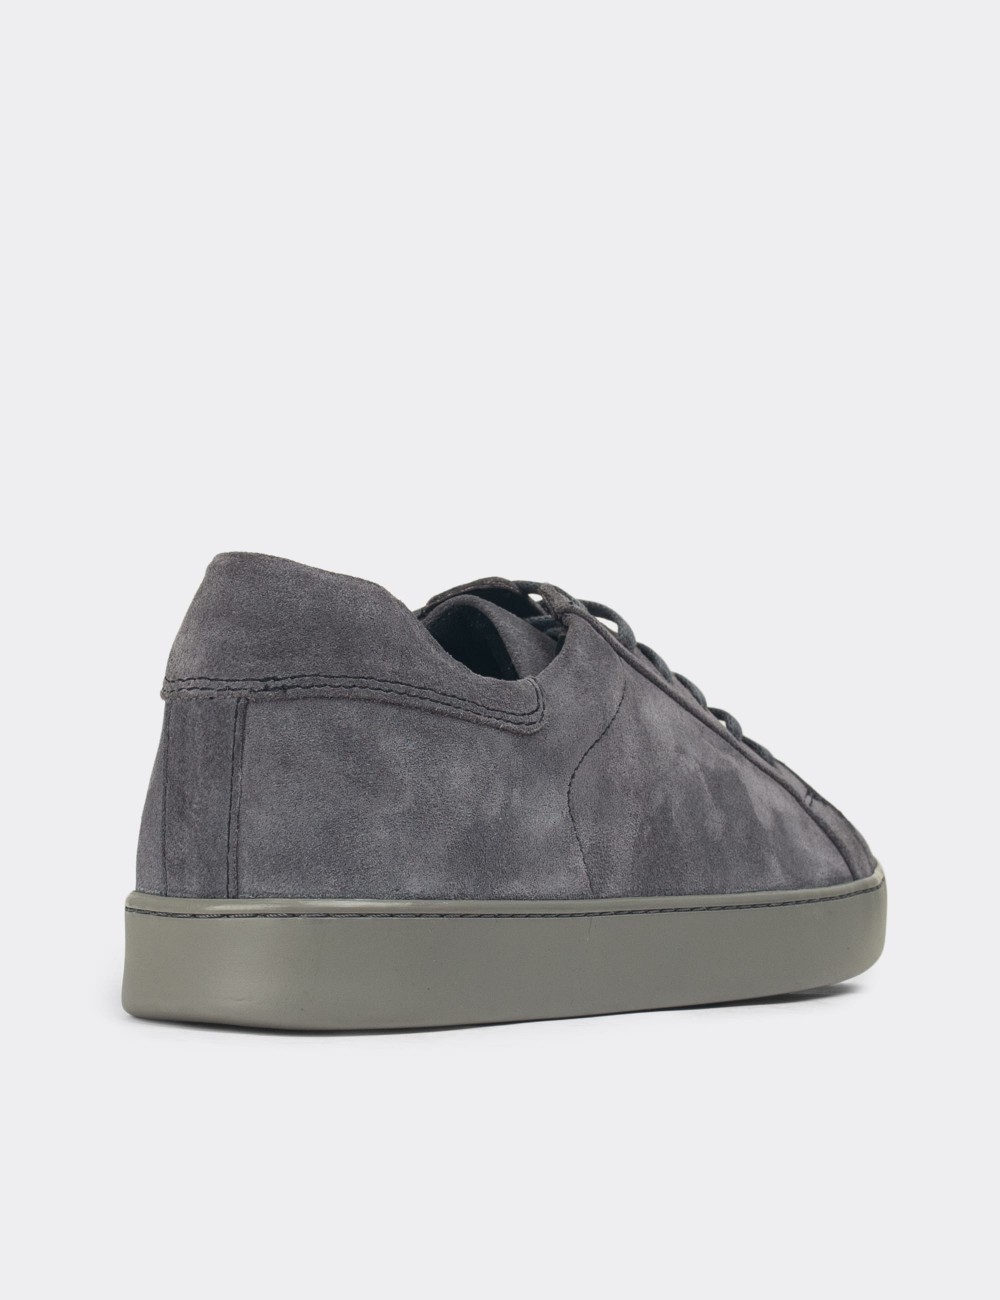 Gray Suede Leather Sneakers - 01829MGRIC02